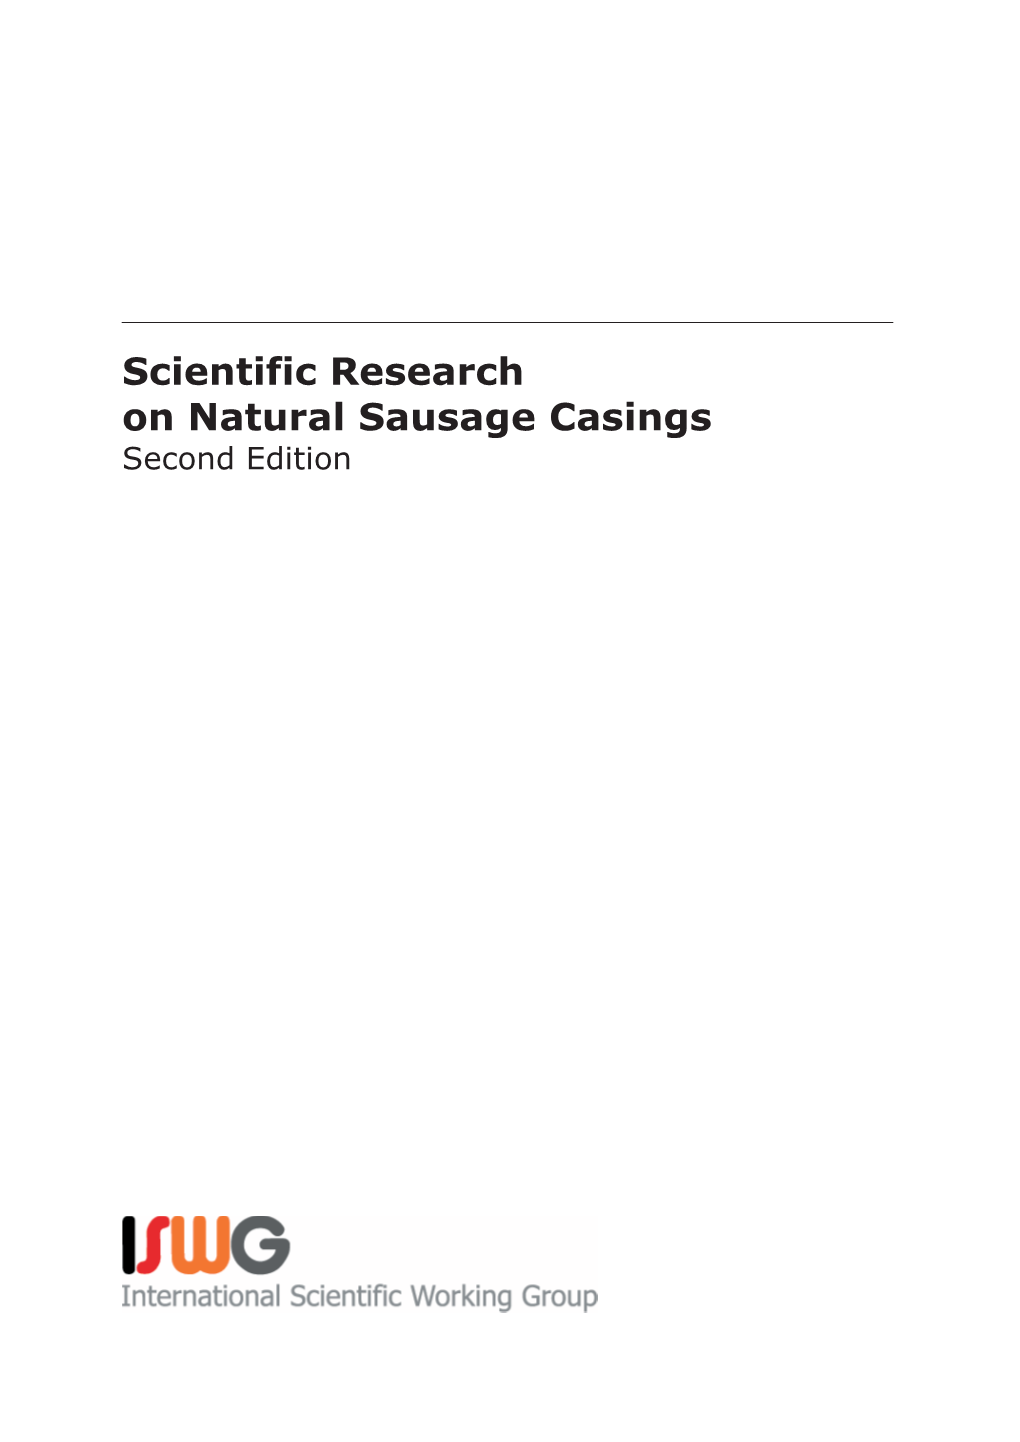 Scientific Research on Natural Sausage Casings Second Edition Editor: Dr